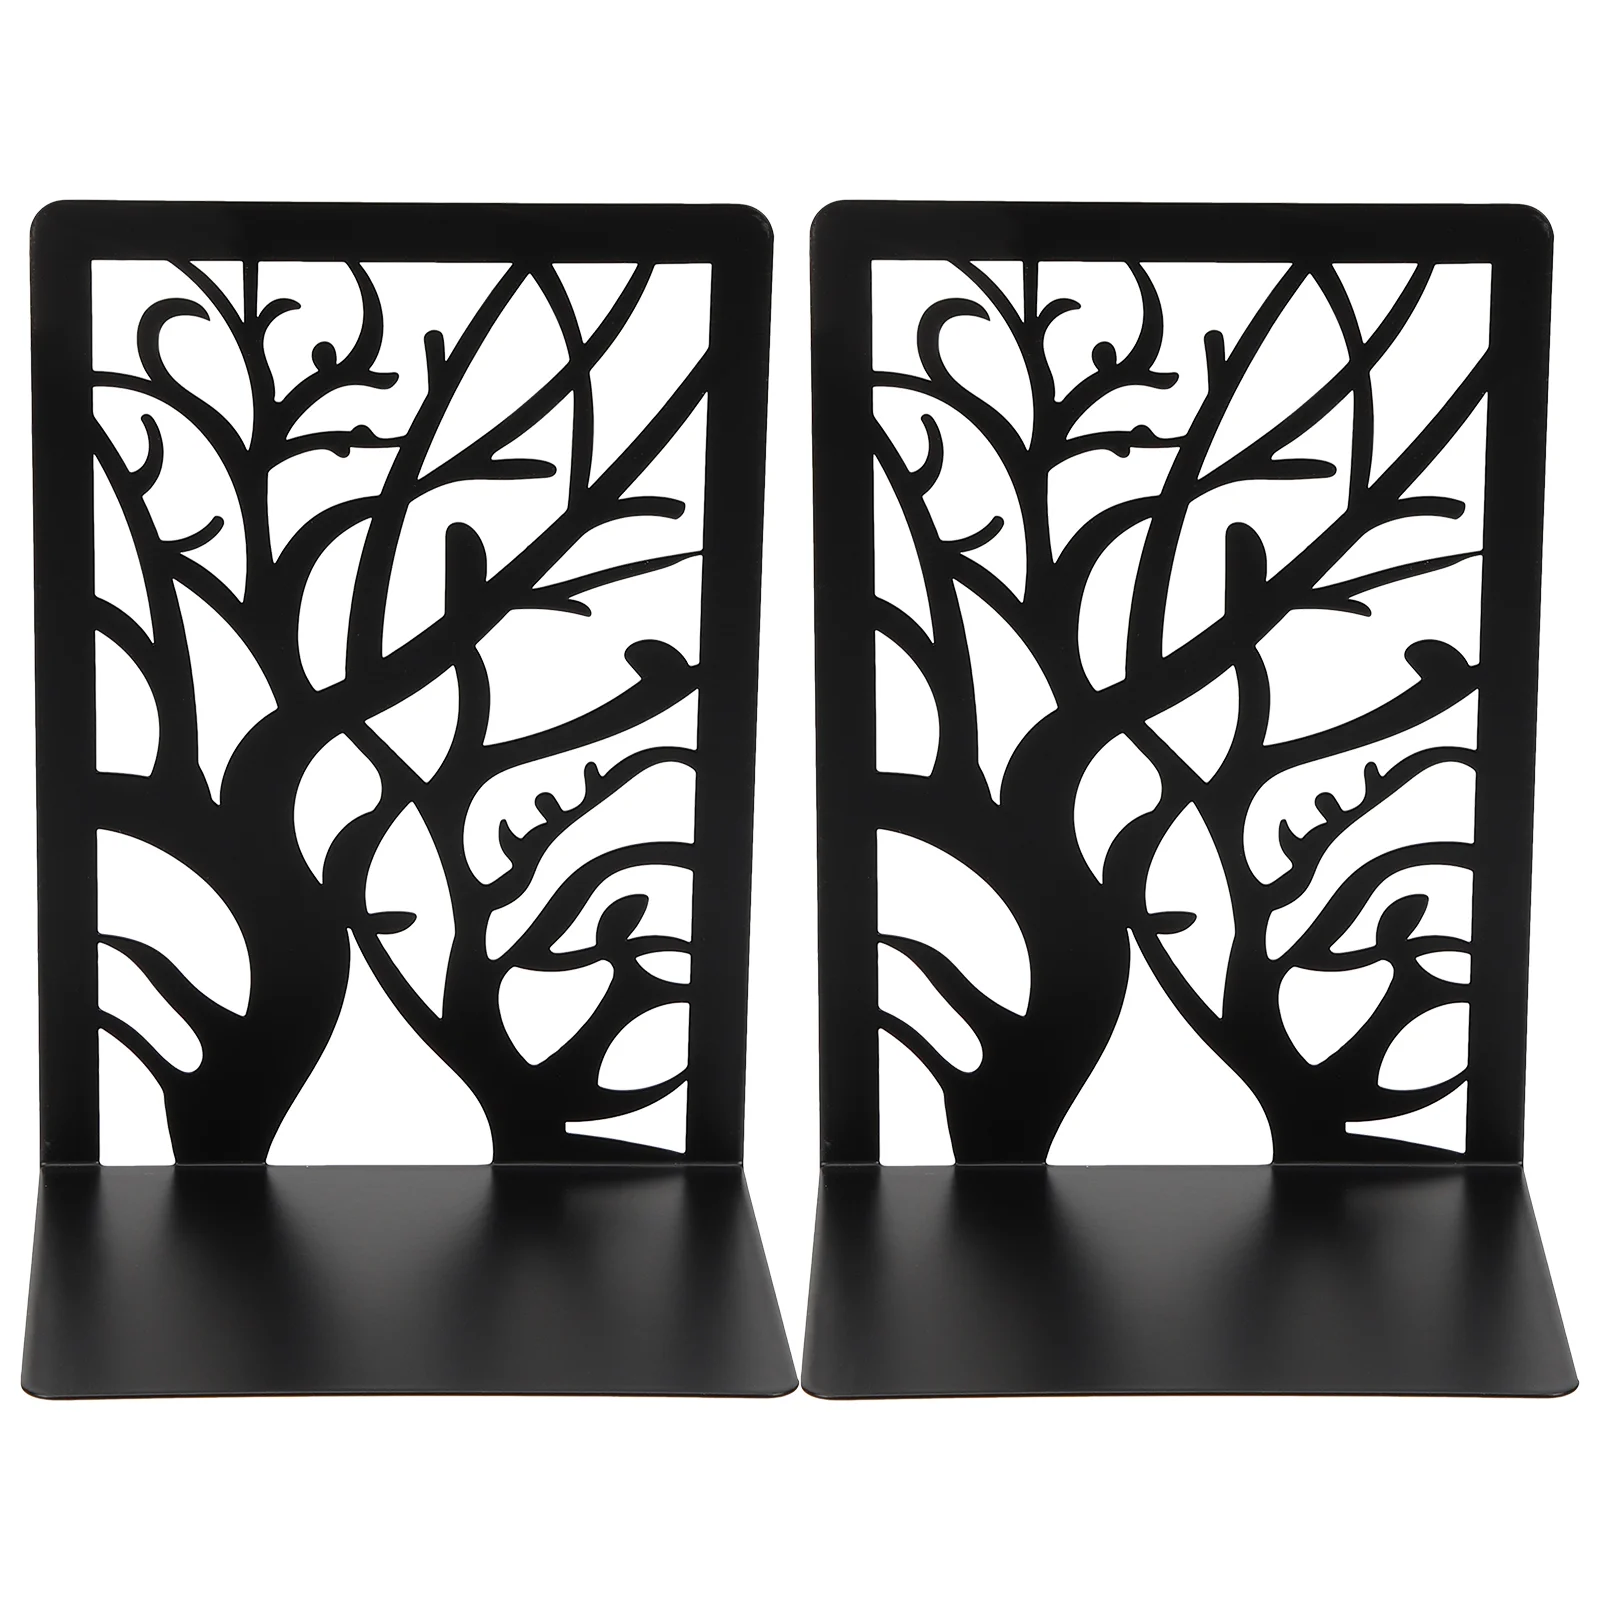 

2Pcs Book Holders Metal Book Ends Crafted Book Stands Creative File Bookends